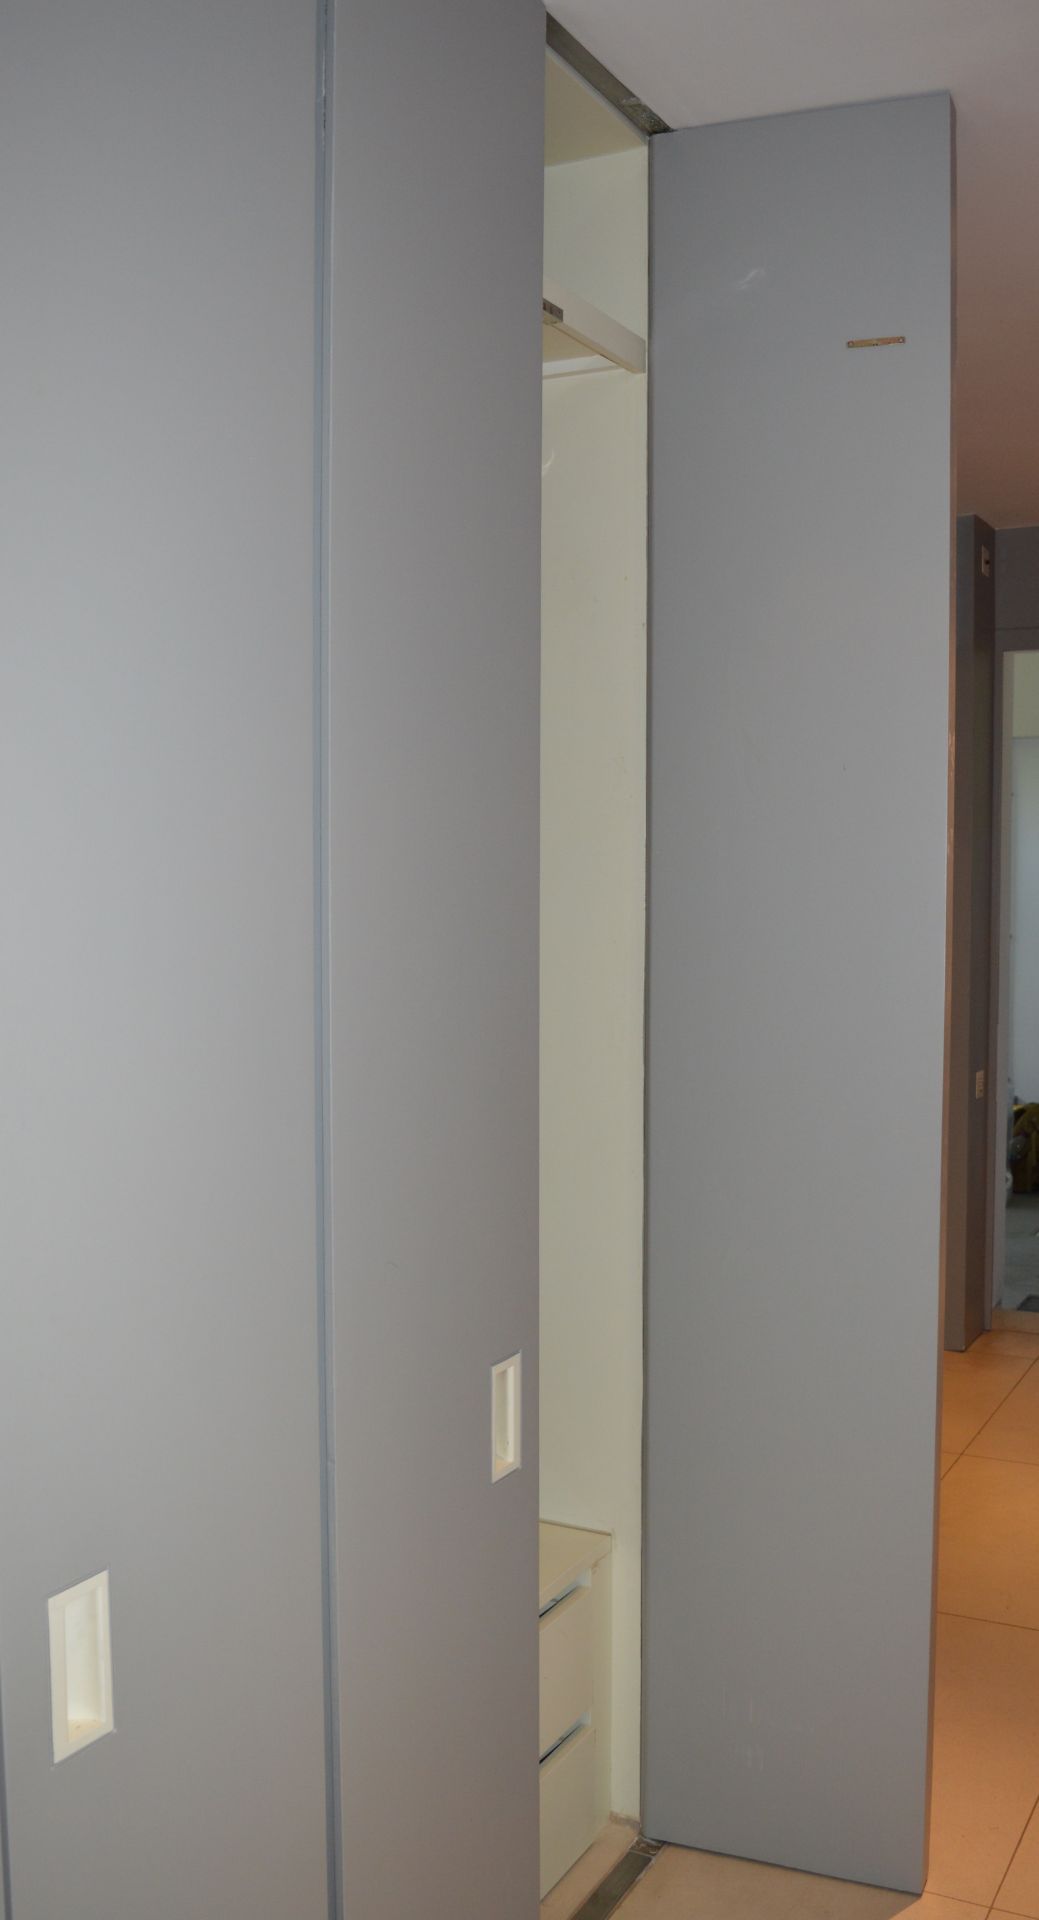 7 x Storage Cupboard Doors With Integrated Handles - Large Substantial Size Covering an Area of 12ft - Image 6 of 8